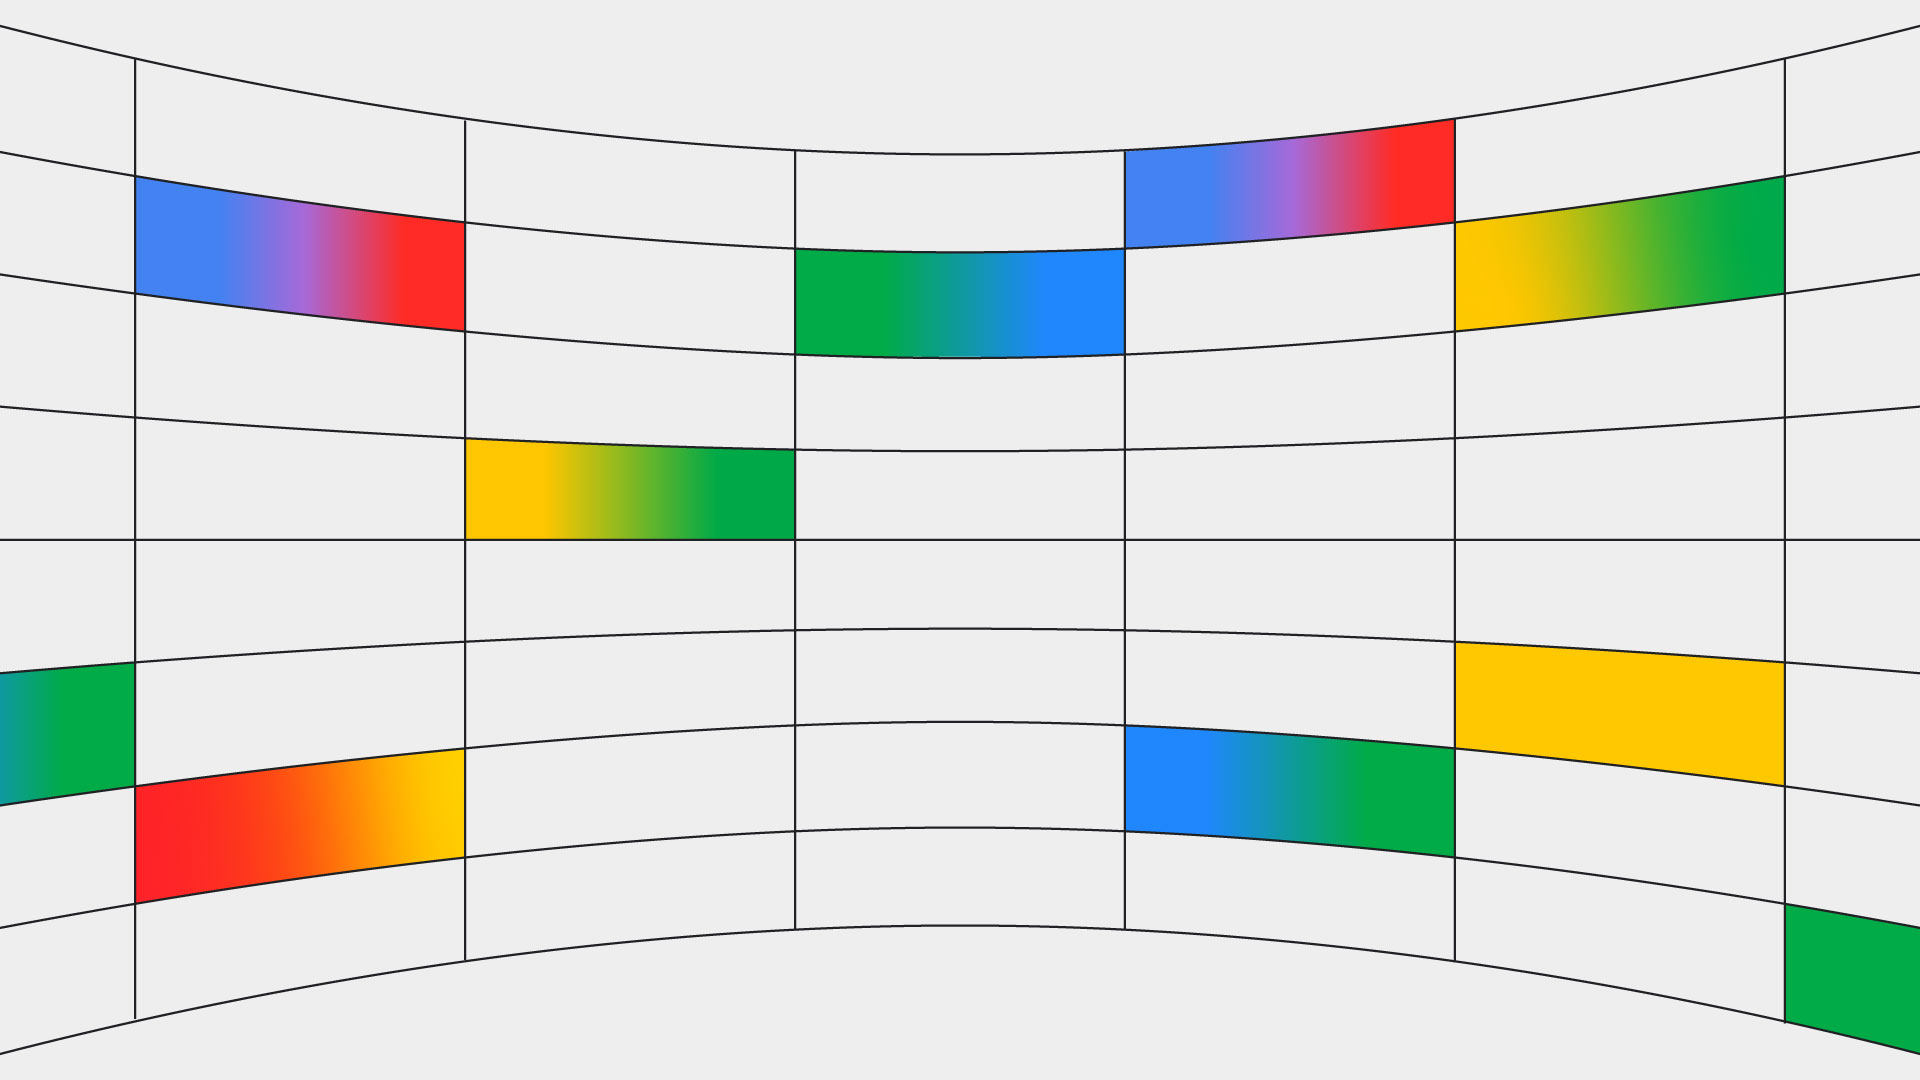 A grid with curved lines and rectangles filled with a gradient of rainbow colors.